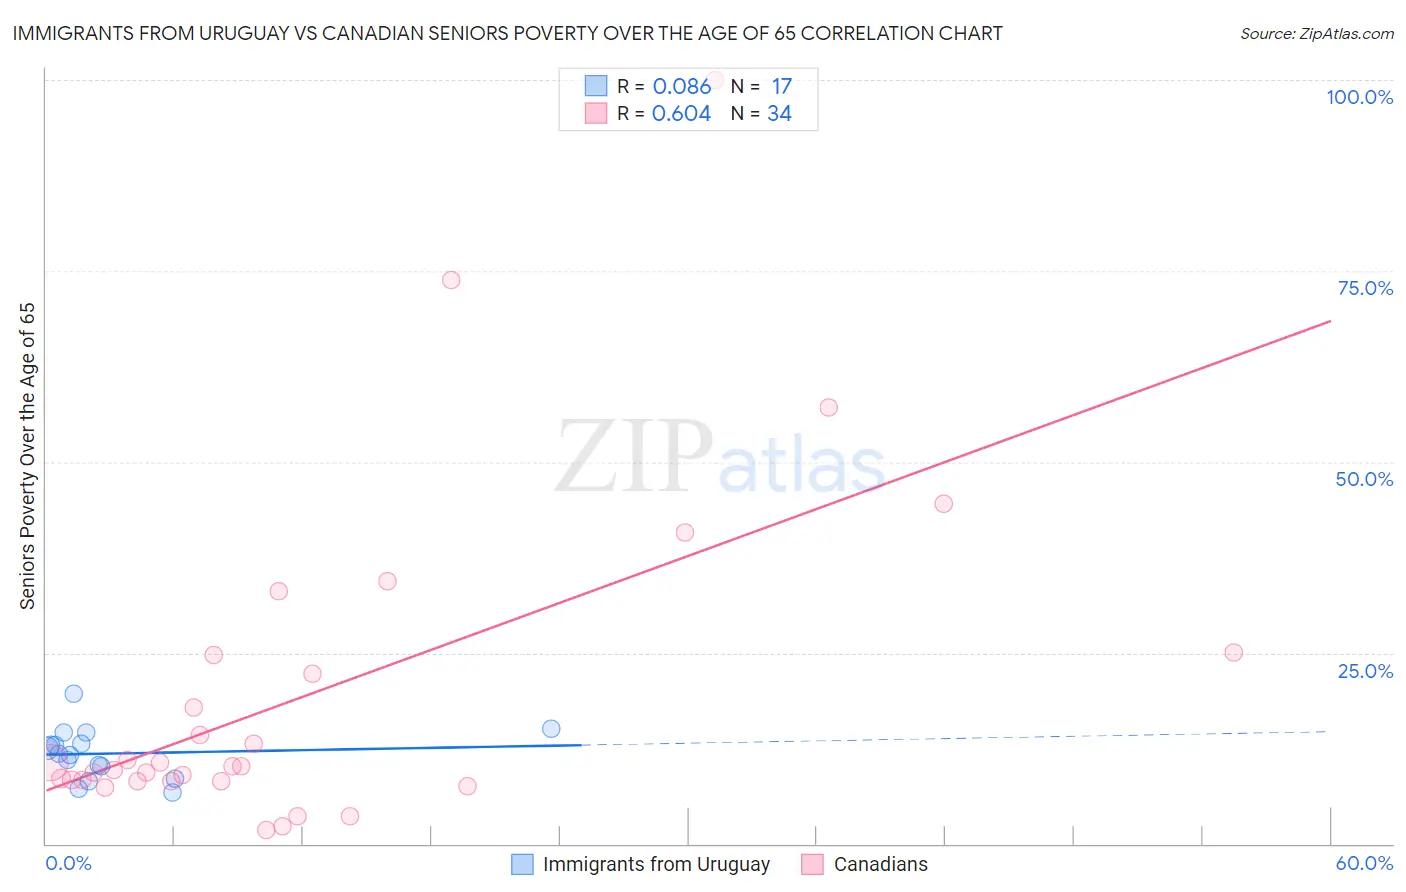 Immigrants from Uruguay vs Canadian Seniors Poverty Over the Age of 65